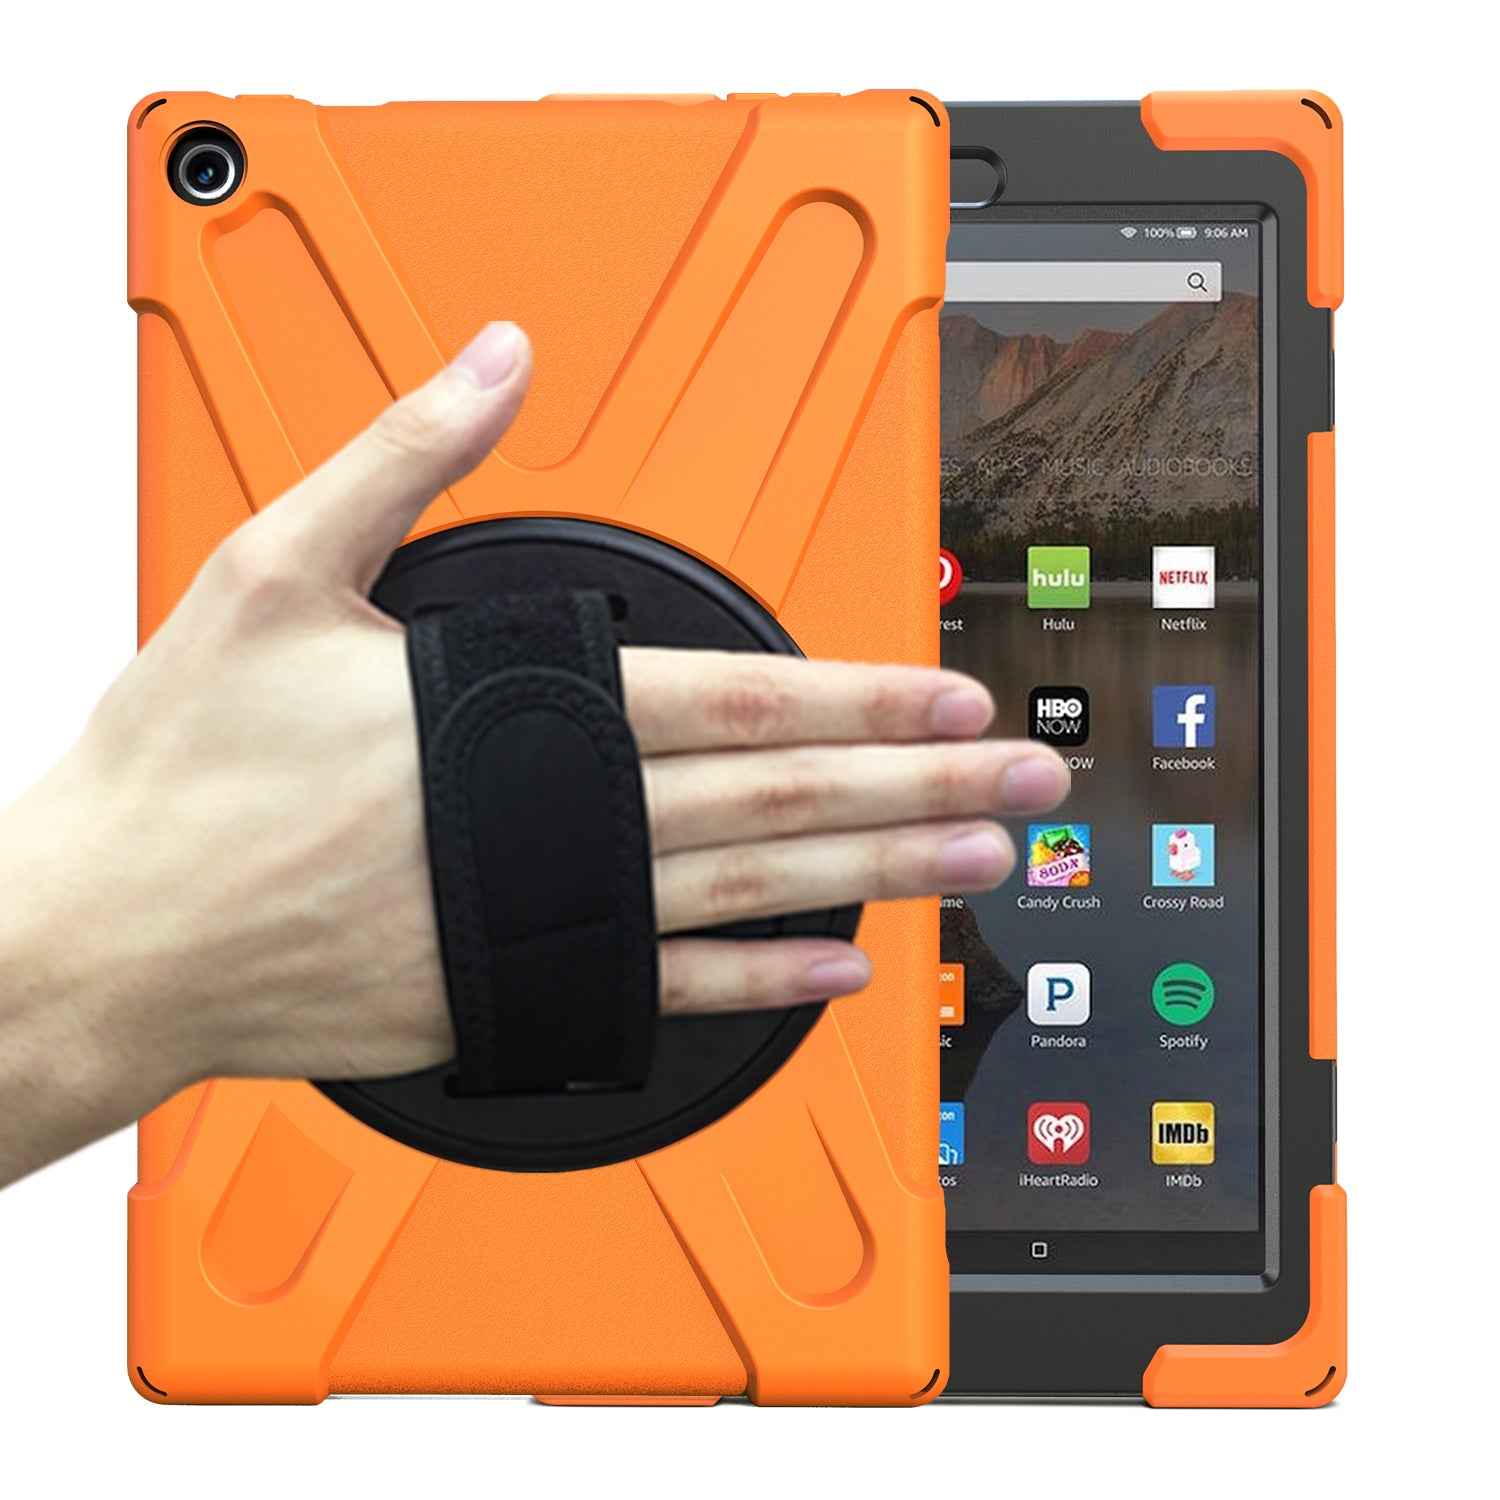 Pirate King Amazon Kindle Fire HD 10 (2018) Case 360 Rotating Stand with Hand Holder Shoulder Strap